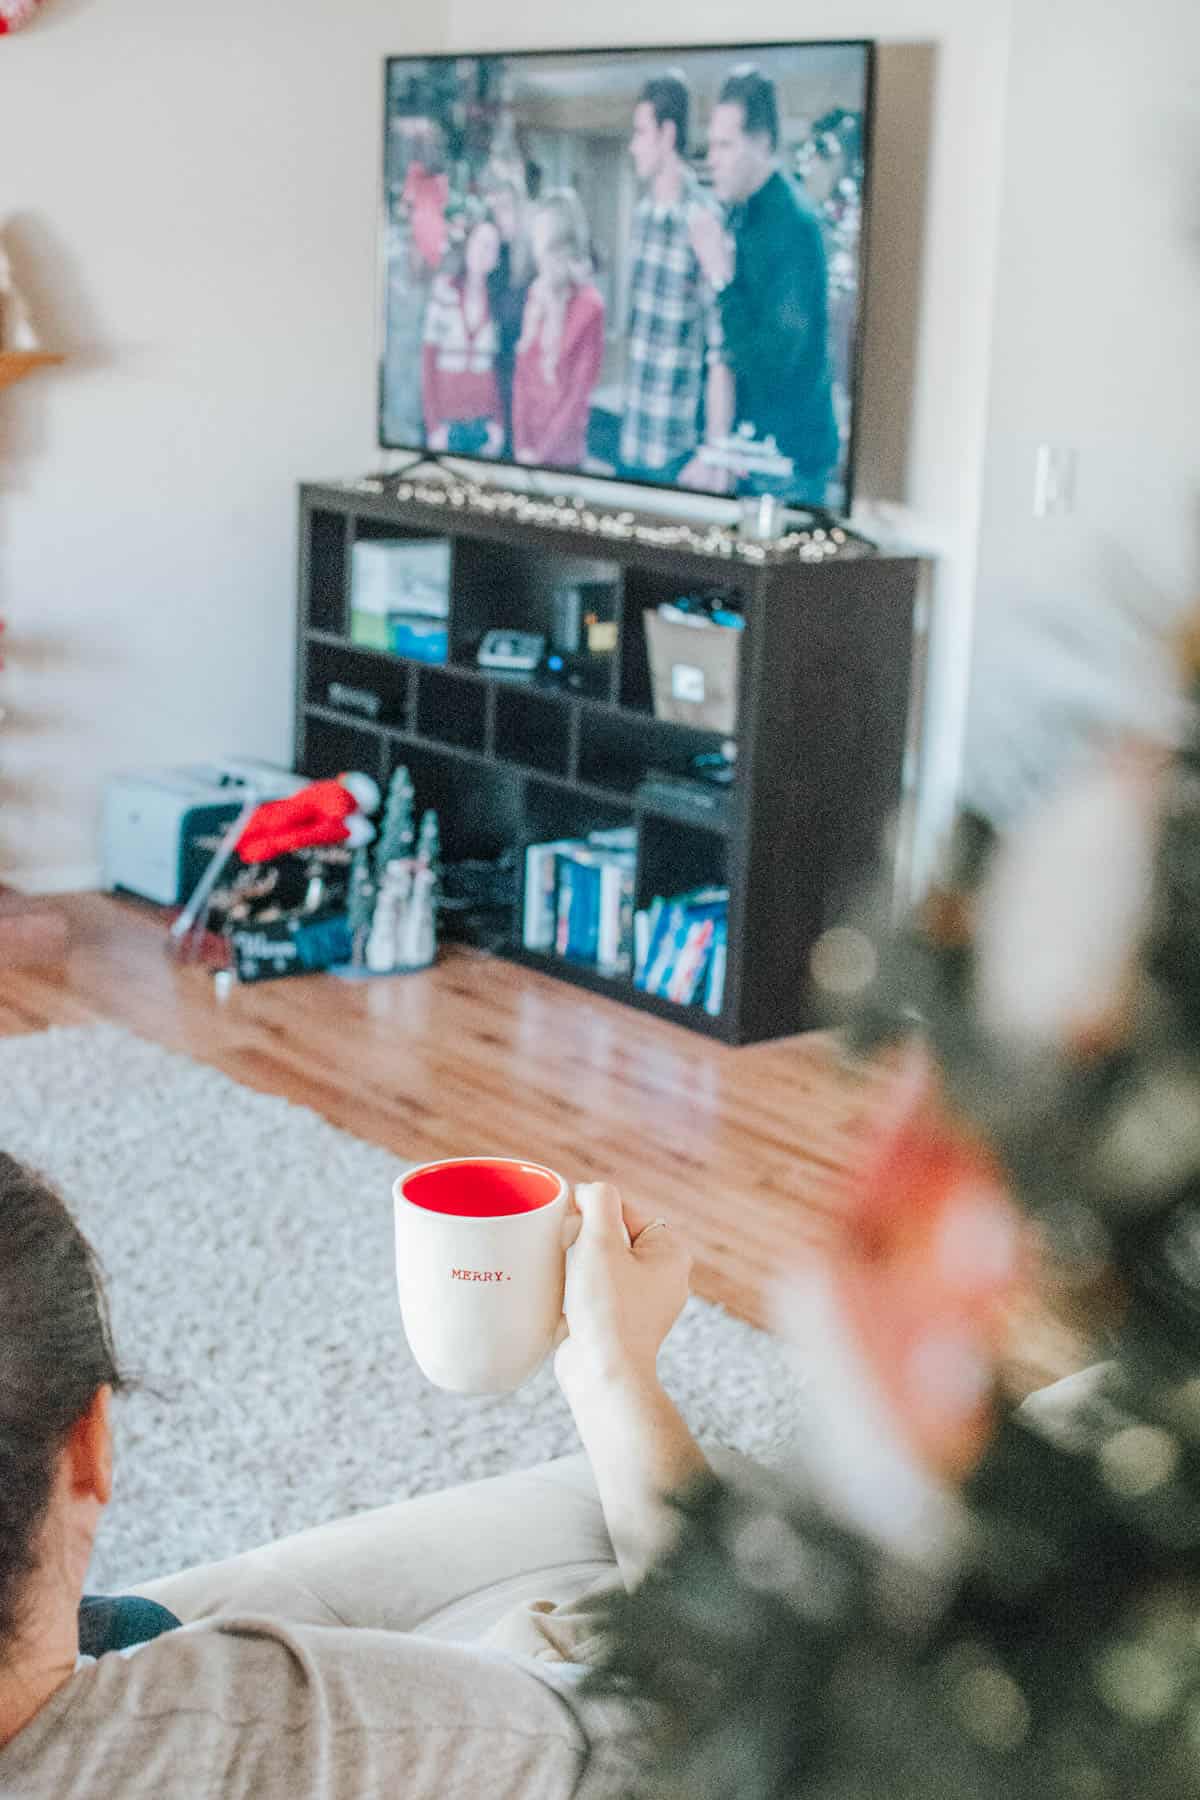 Woman holding coffee mug on a couch while watching TV.